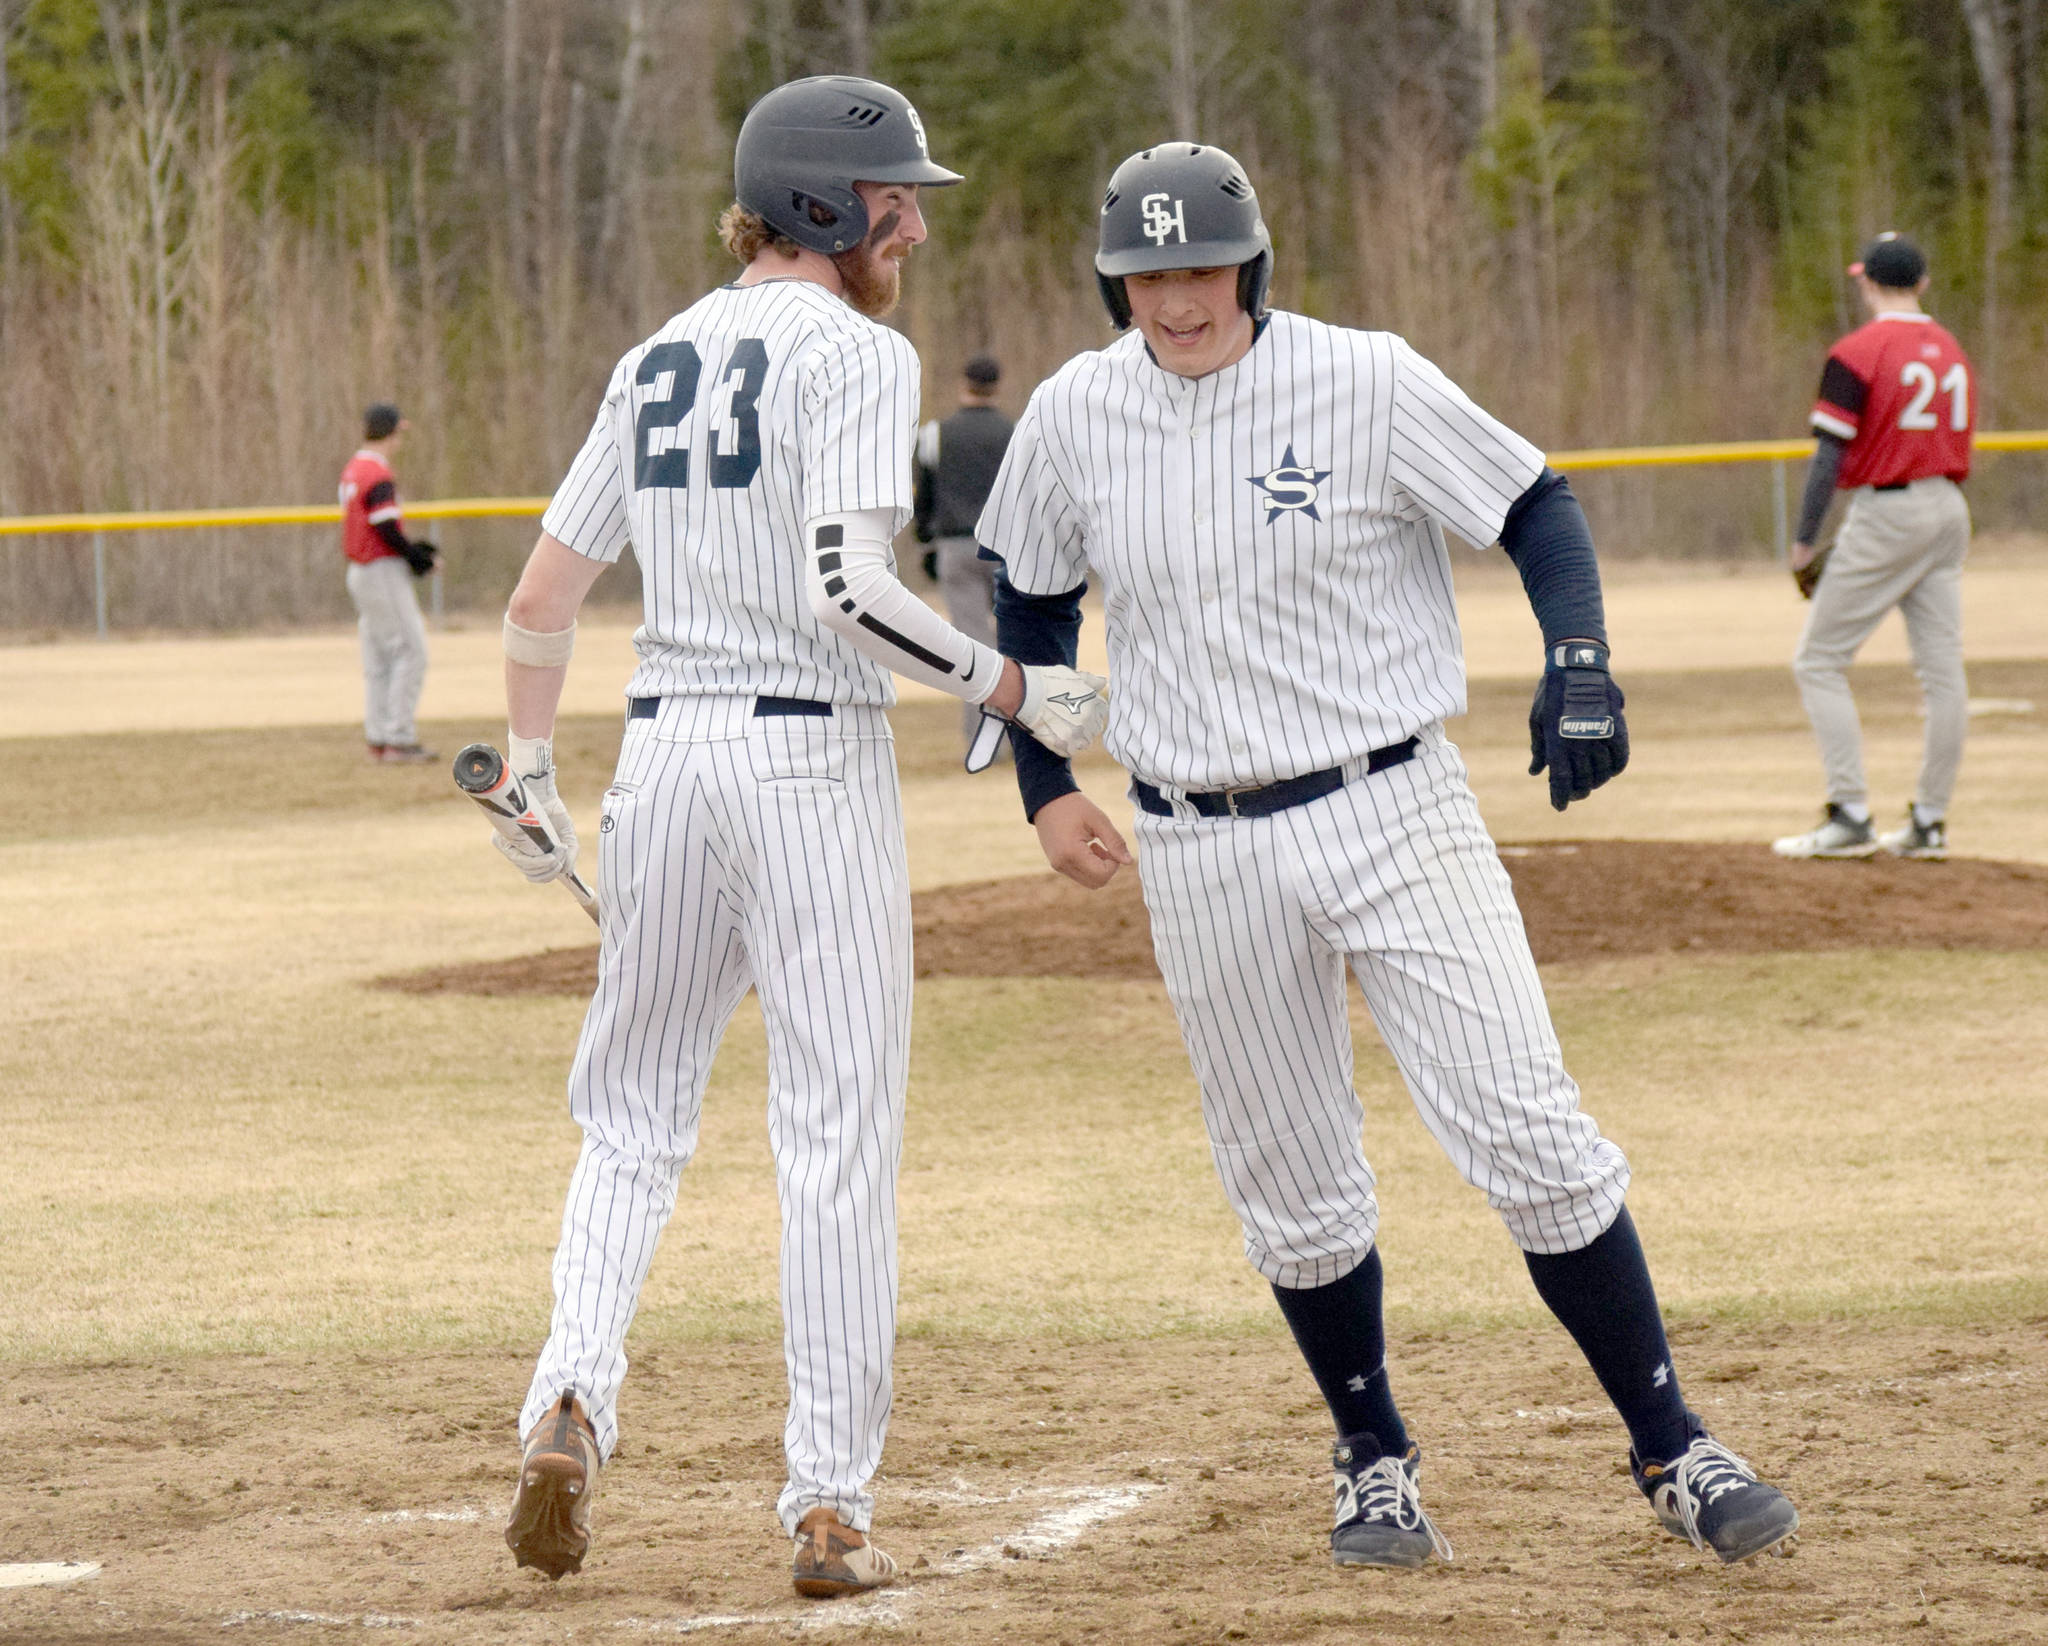 Soldotna’s David Michael (23) congratulates Jacob Boze after Boze hit a two-run home run in the second inning against Kenai Central at the Soldotna Little League fields in Soldotna, Alaska. (Photo by Jeff Helminiak/Peninsula Clarion)